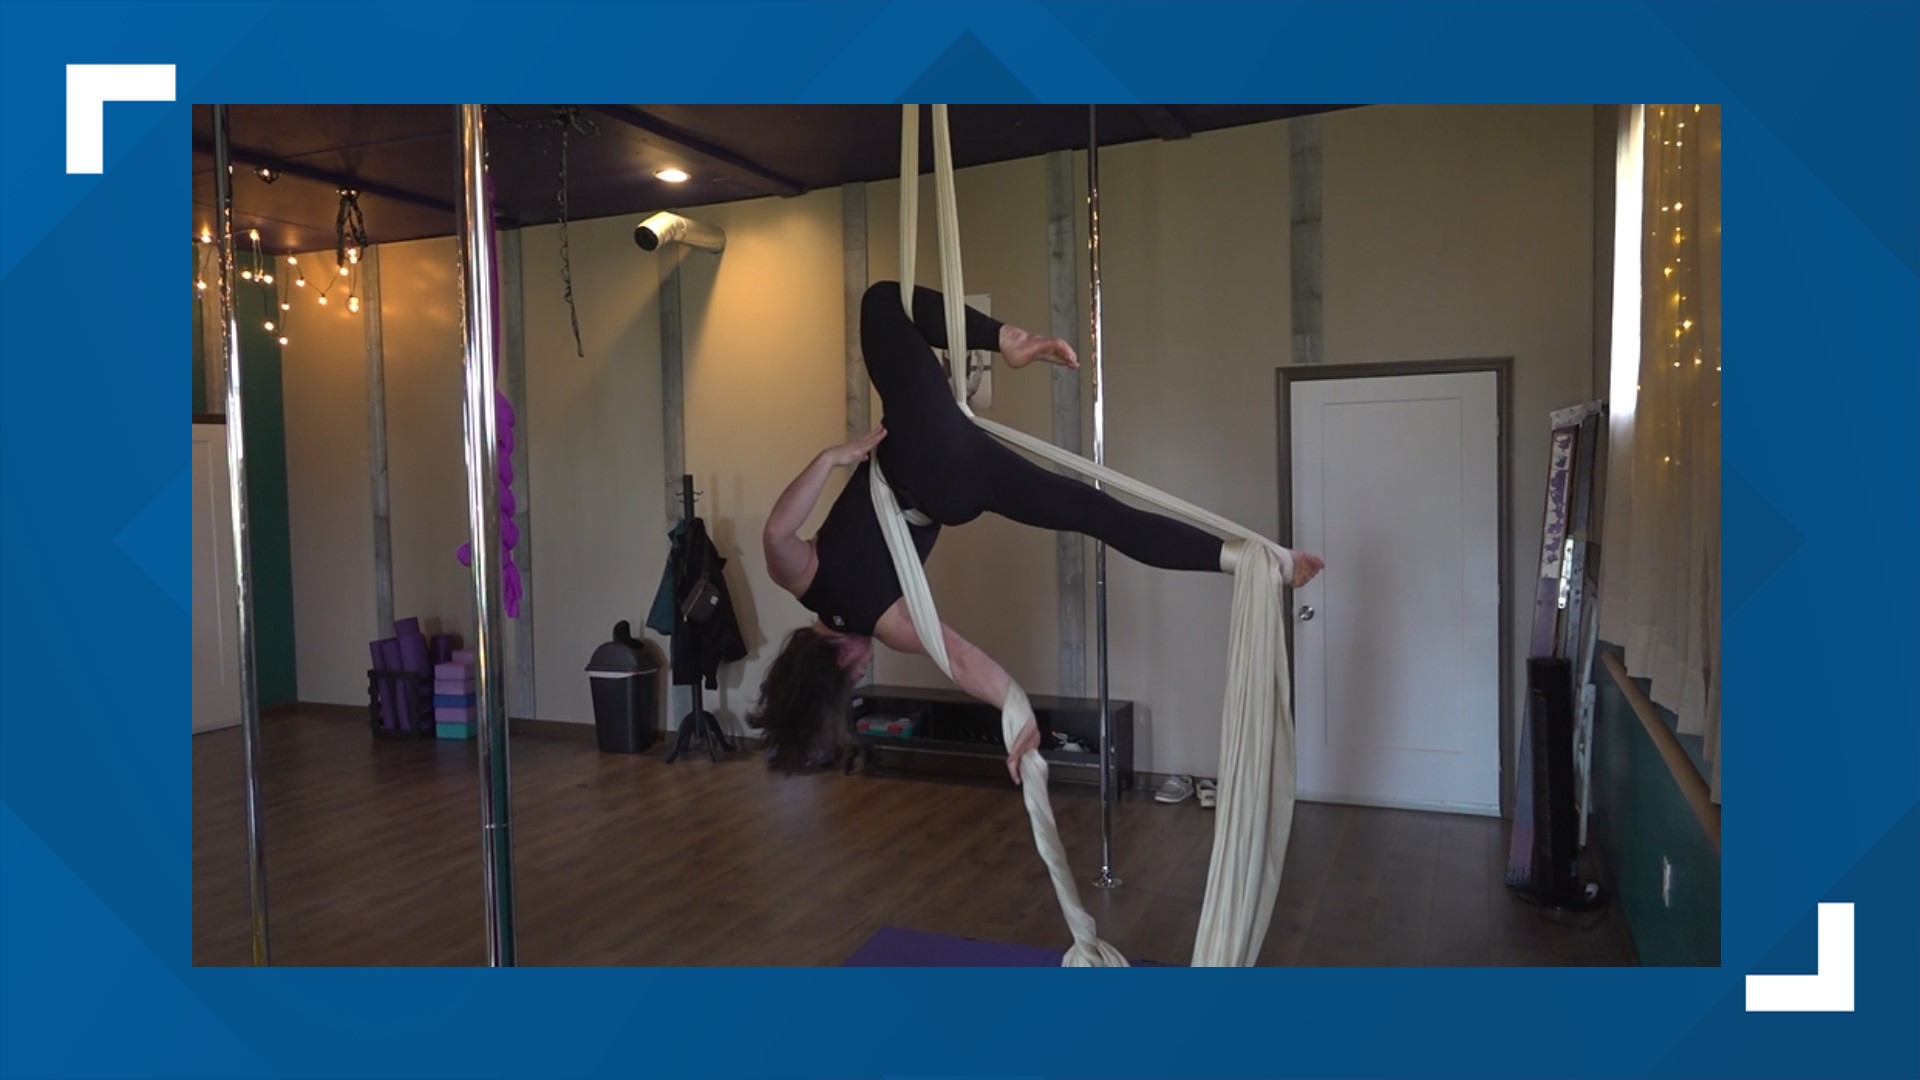 Aerial silks is a safe and empowering workout, that tests the muscles in a different way!